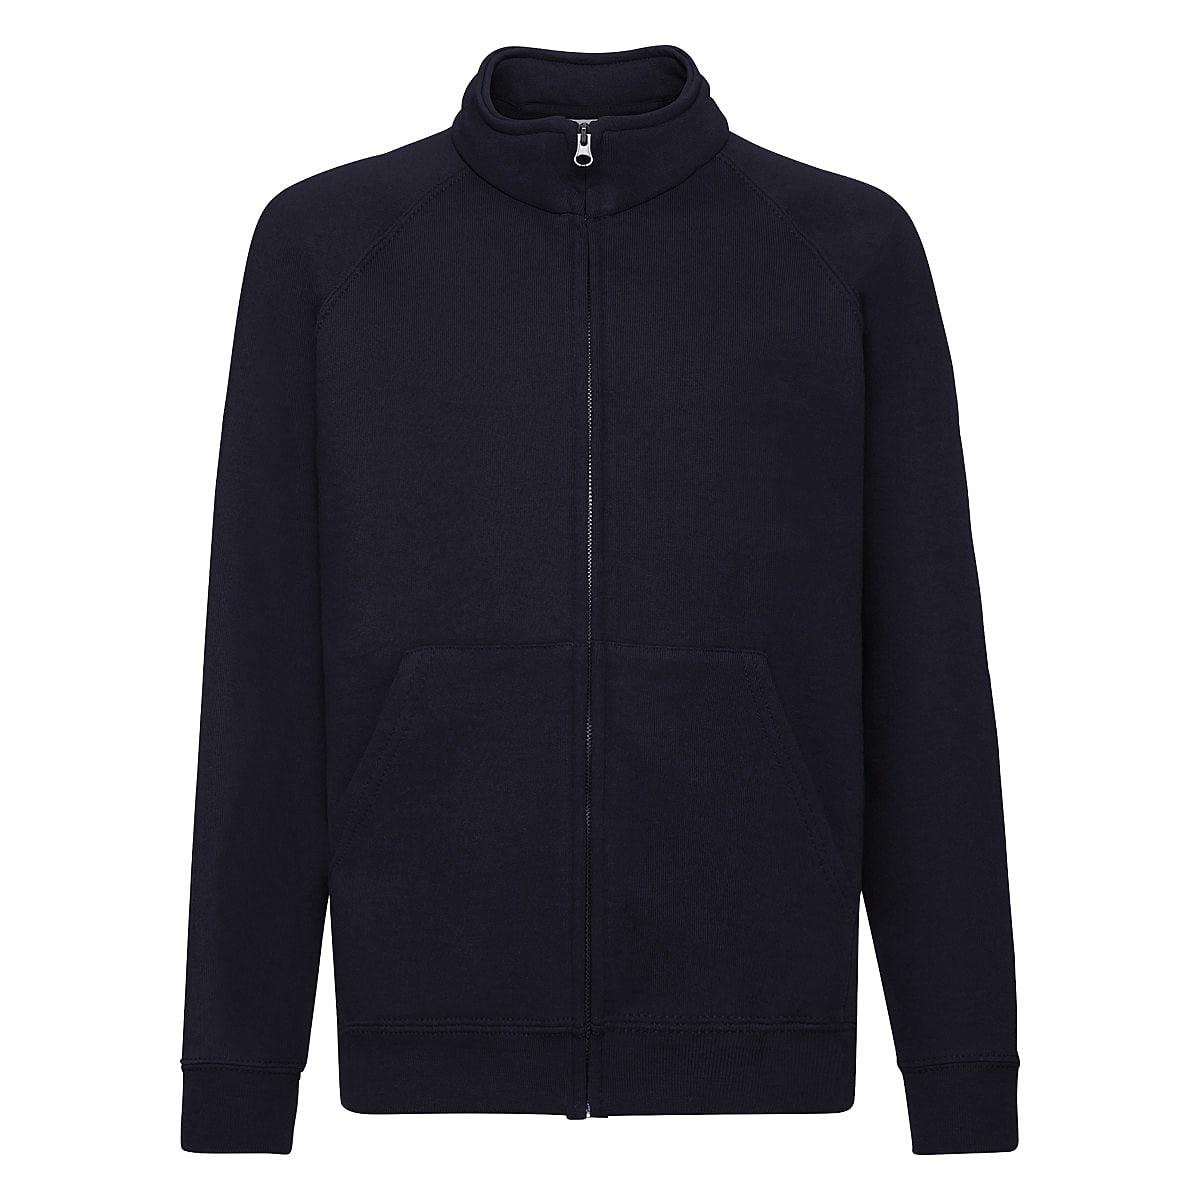 Fruit Of The Loom Childrens Sweat Jacket in Deep Navy (Product Code: 62005)